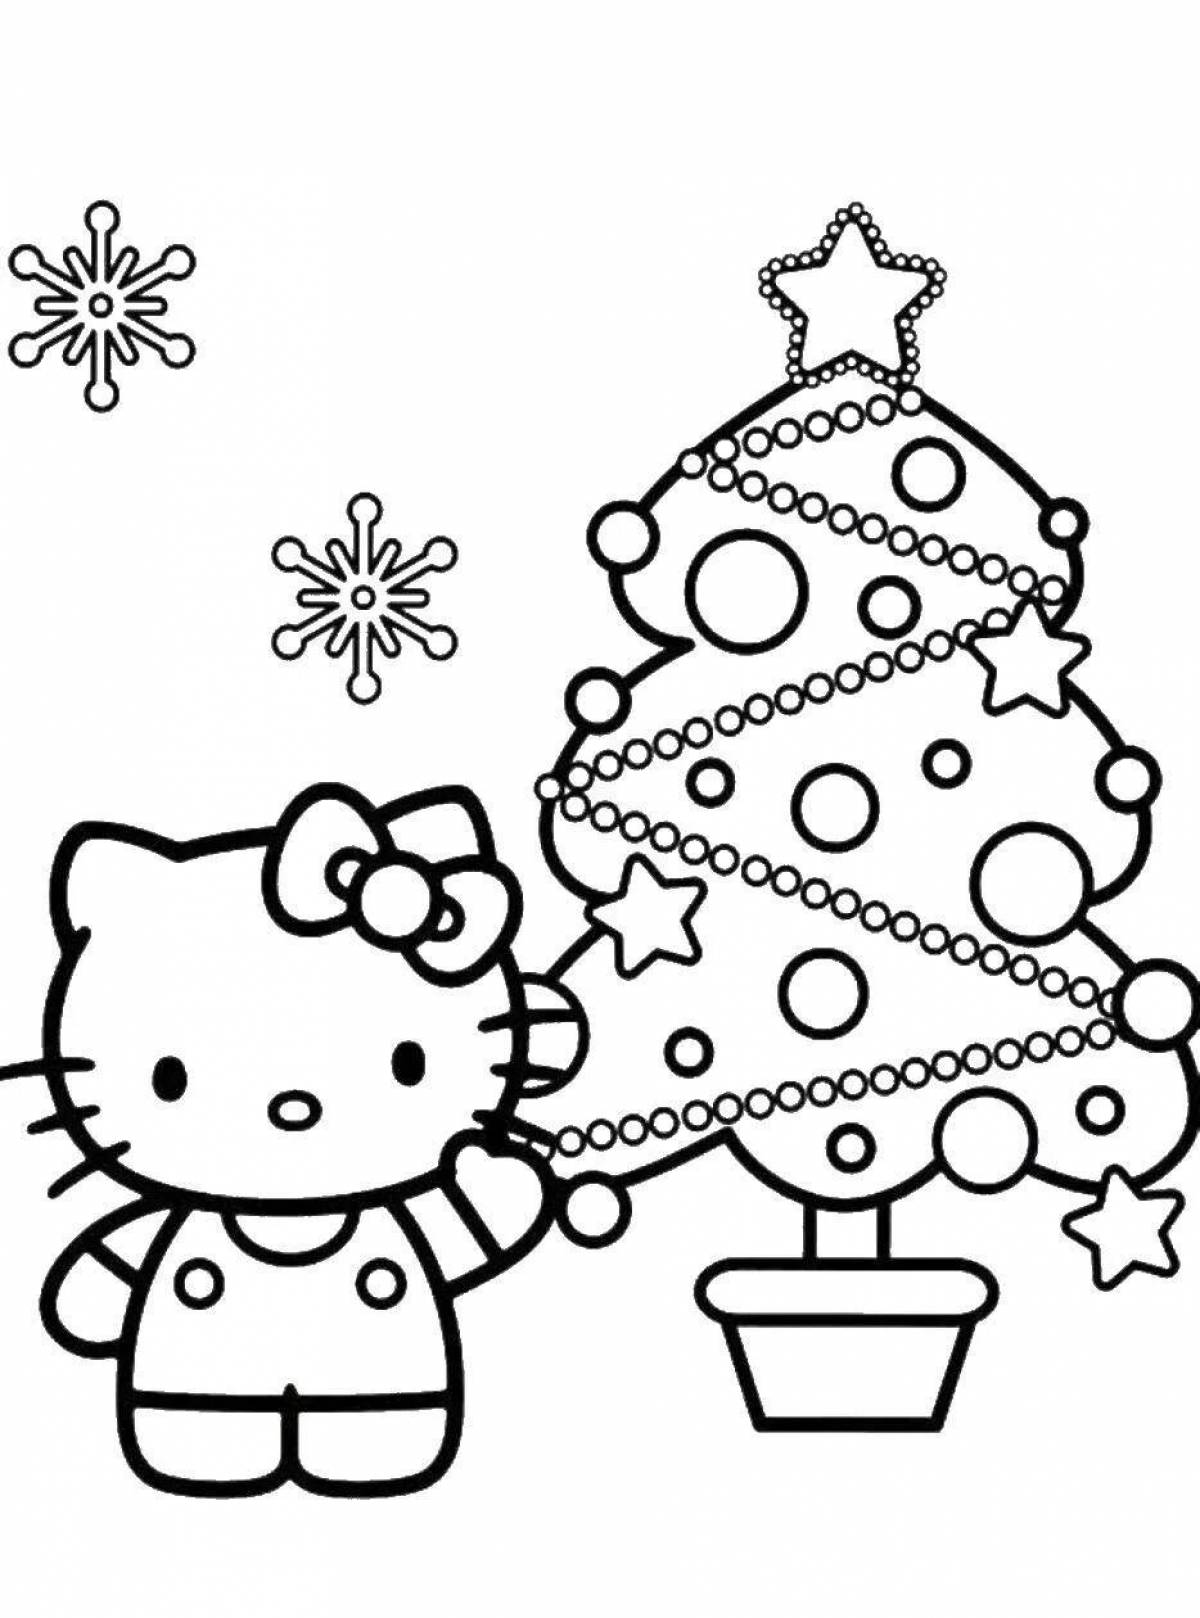 Chic Christmas coloring book